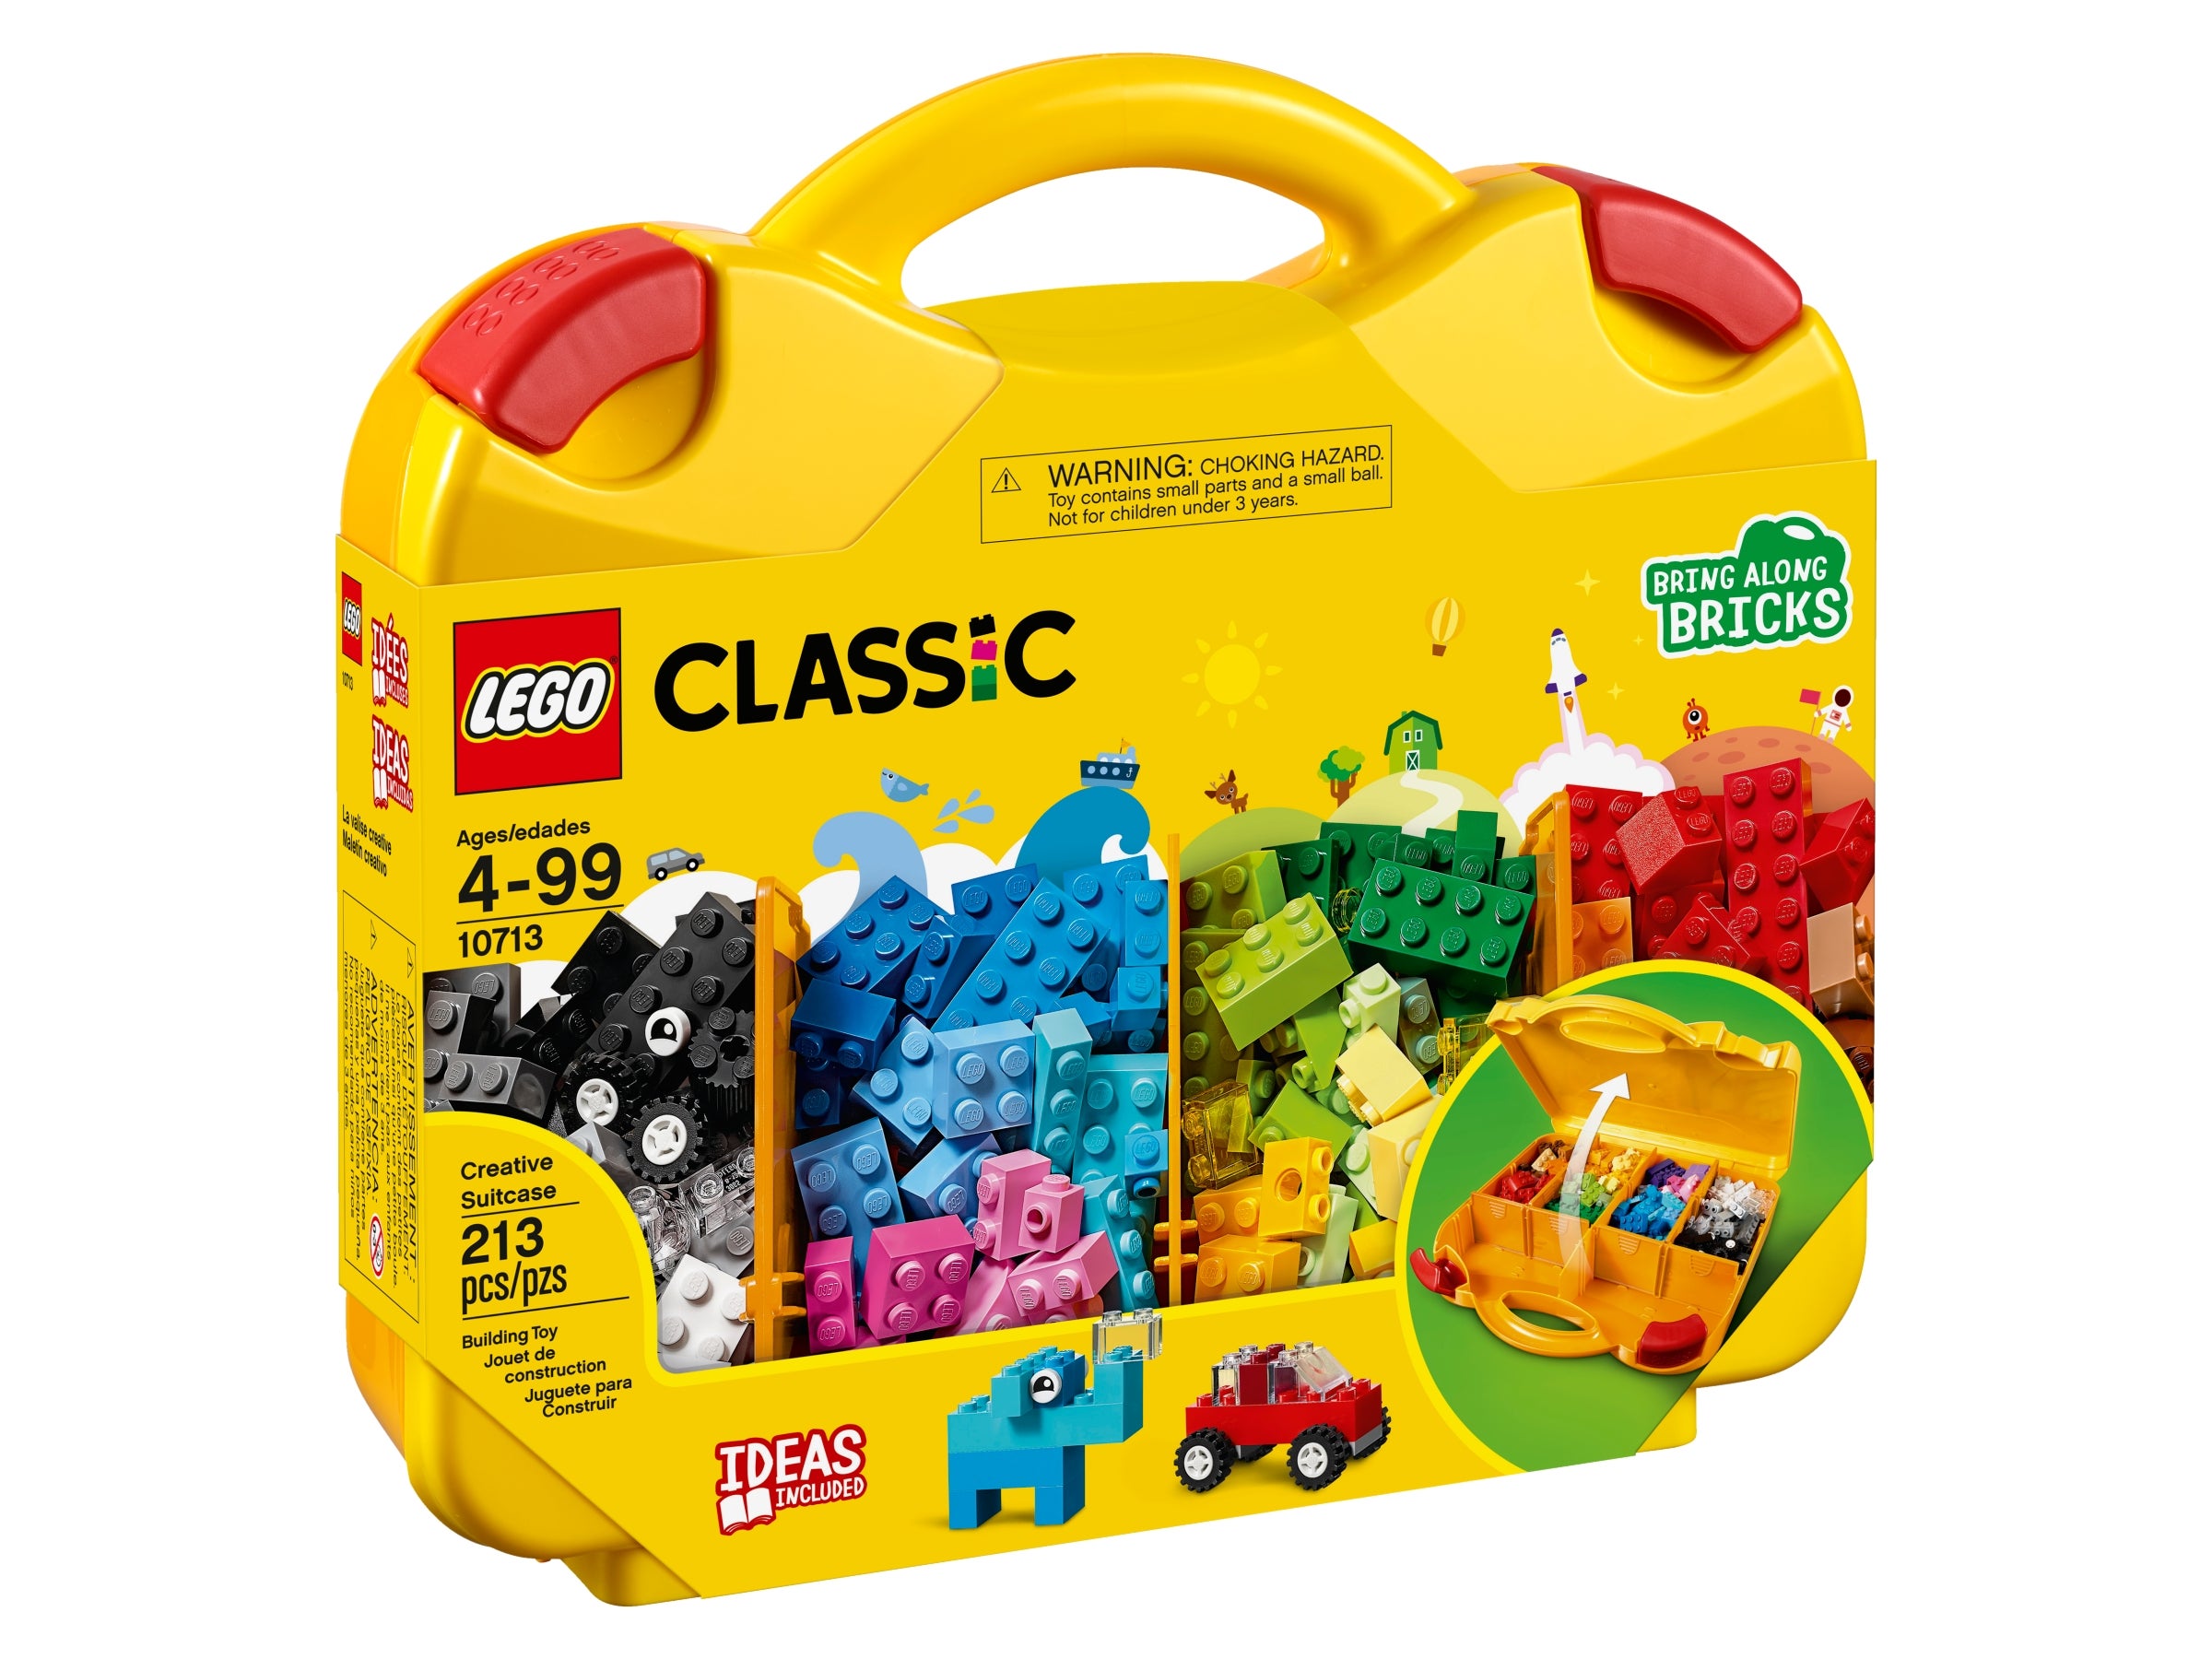 LEGO Creative Suitcase LEGO Classic for sale online 10713